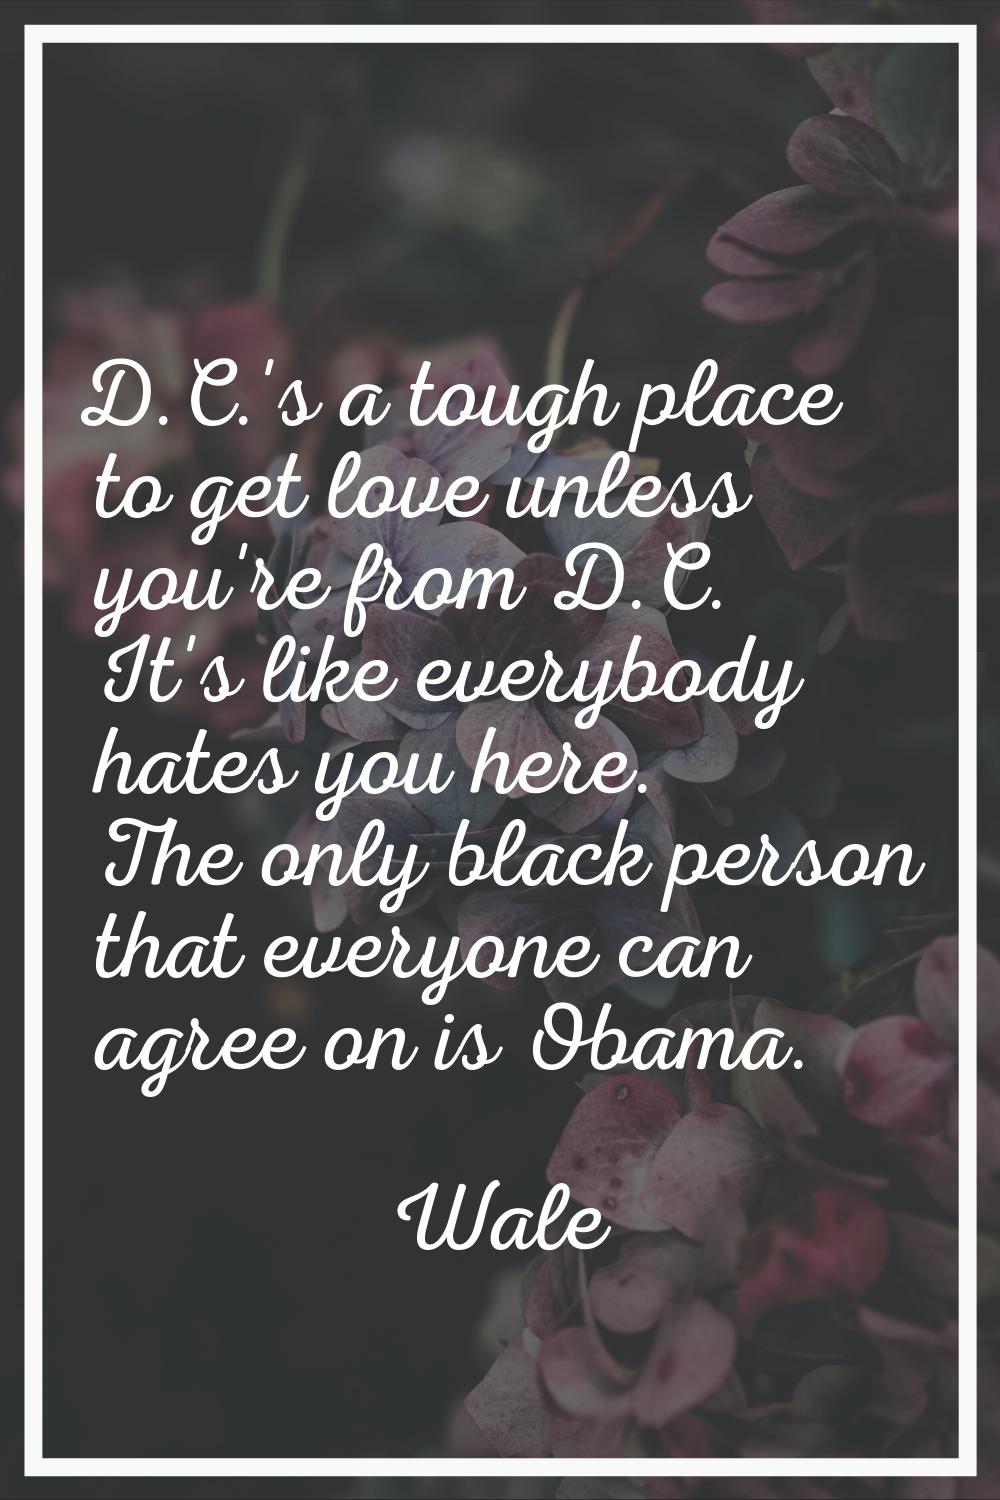 D.C.'s a tough place to get love unless you're from D.C. It's like everybody hates you here. The on